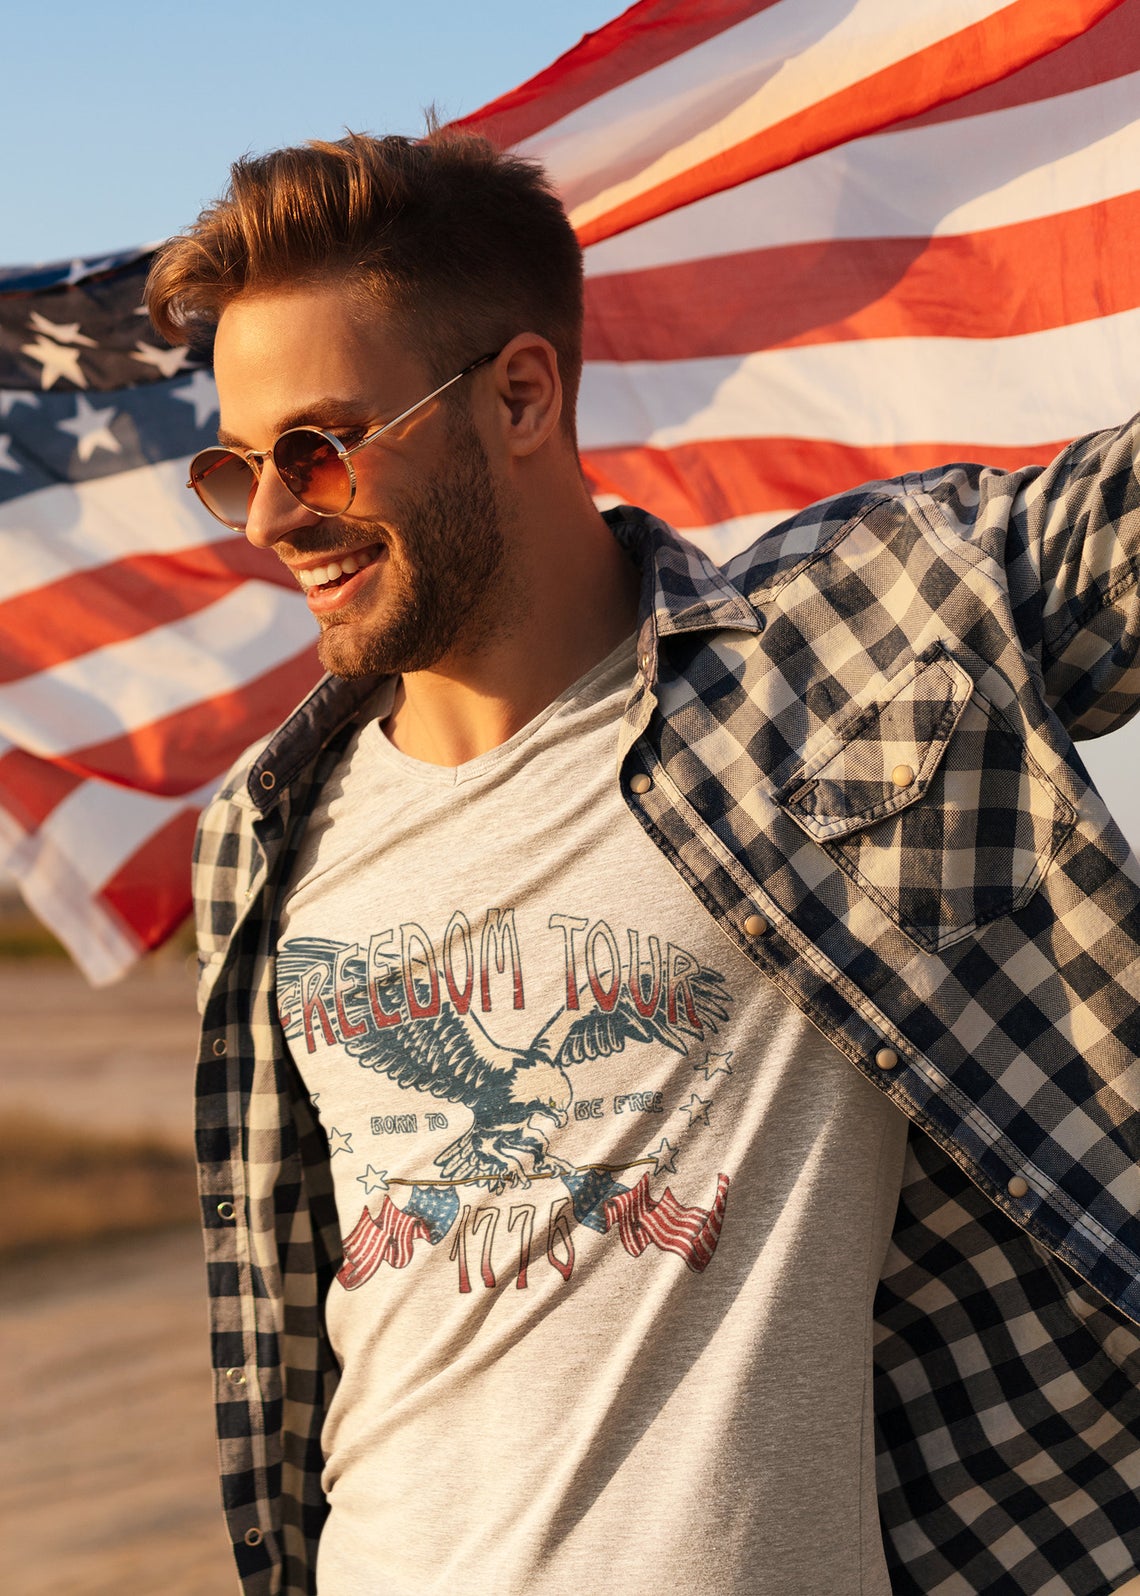 Freedom Tour Rocker Family Matching Shirts / Rocker Tees Memorial Day July 4th / Retro Style/ Toddler - Youth - Adult Sizing